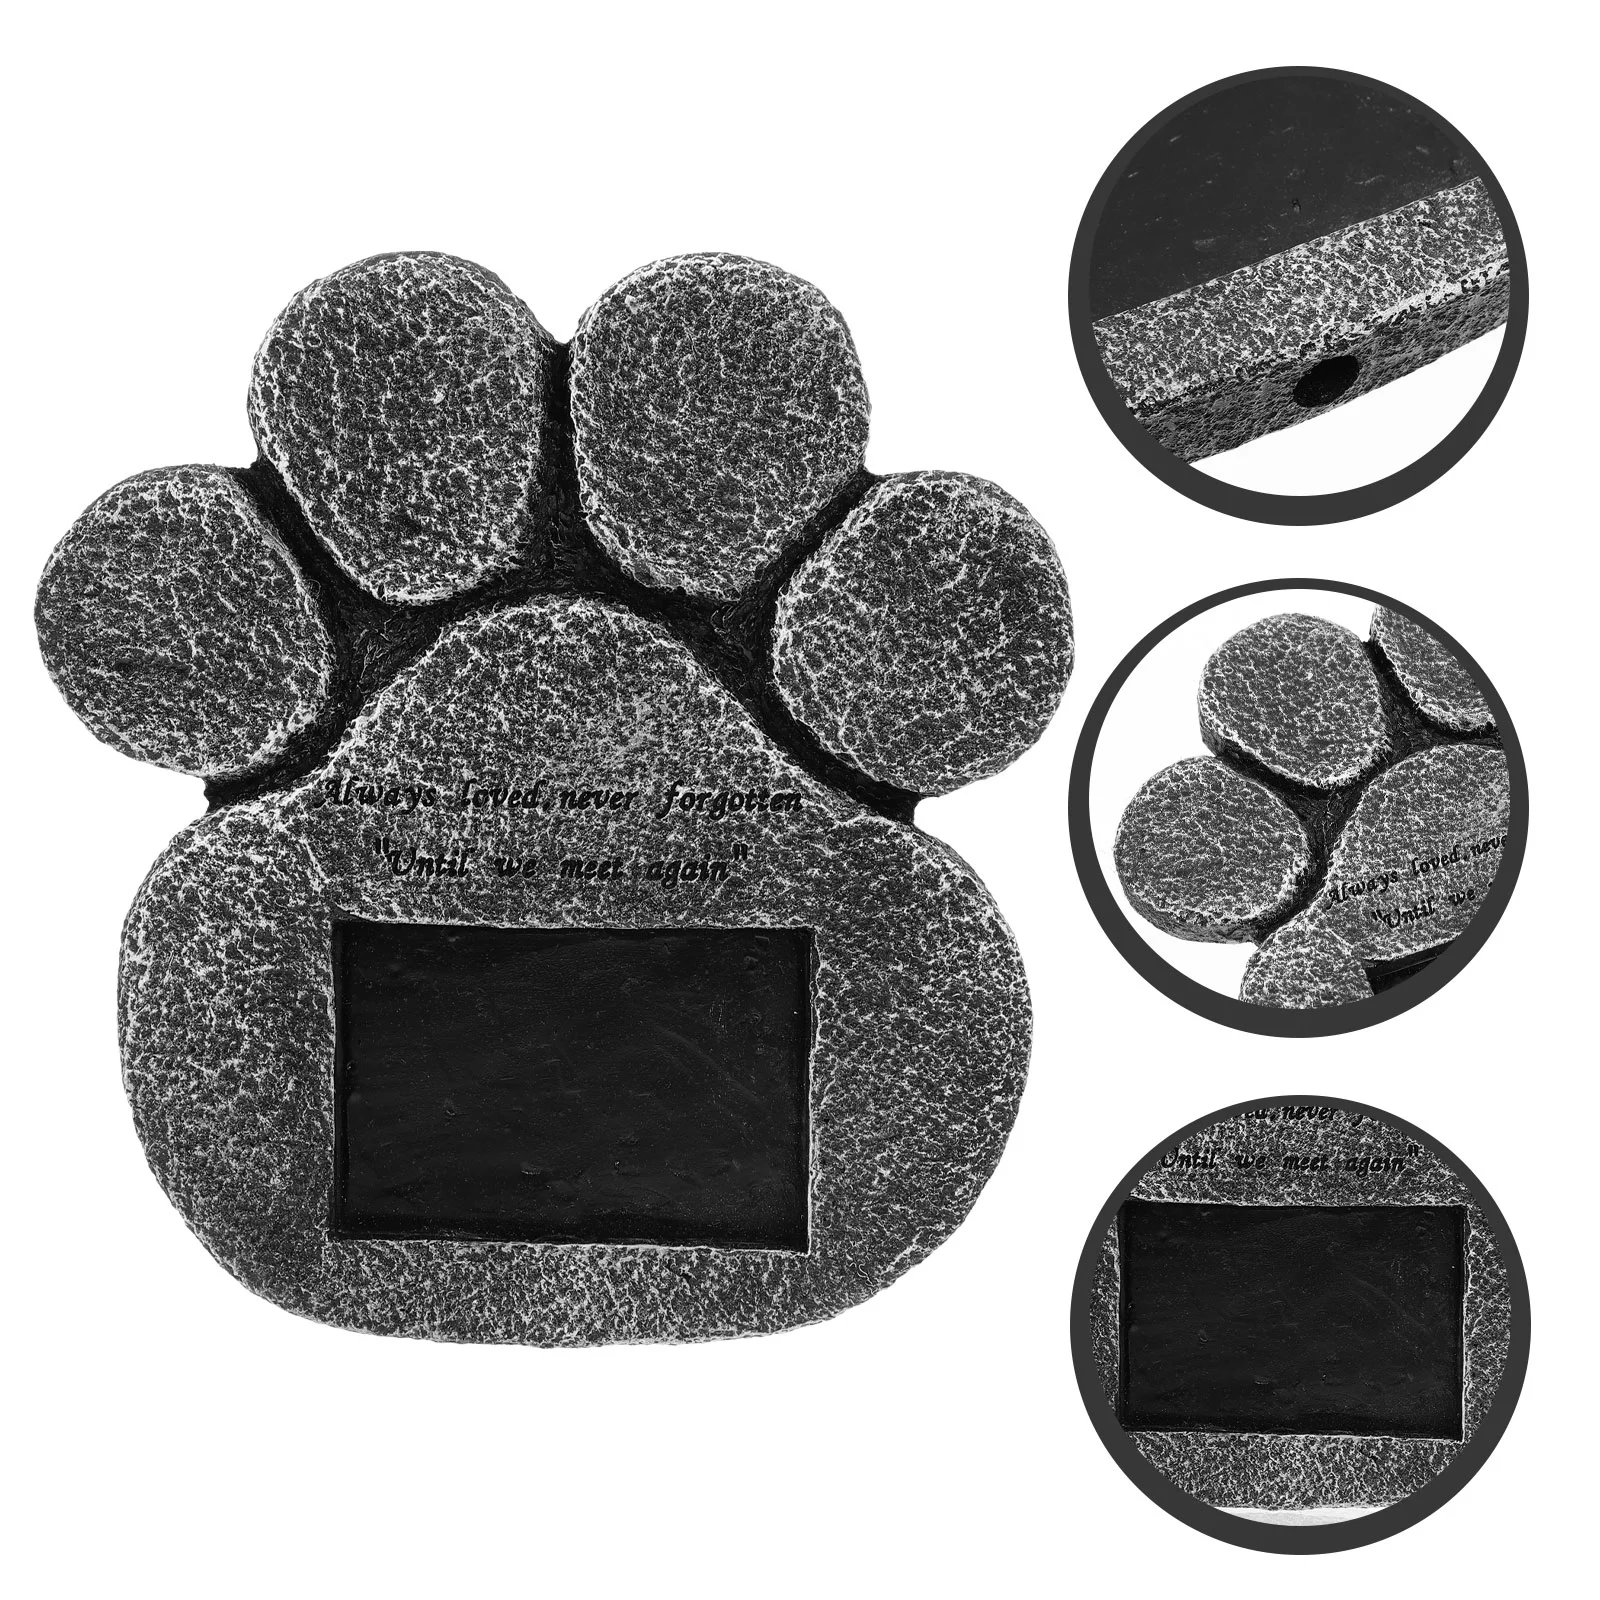 

Pet Memorial Dog Tombstone Grave Stone Cat Marker Markers Stones Cemetery Resin Garden Paw Puppy Decorations Gravestone Sympathy